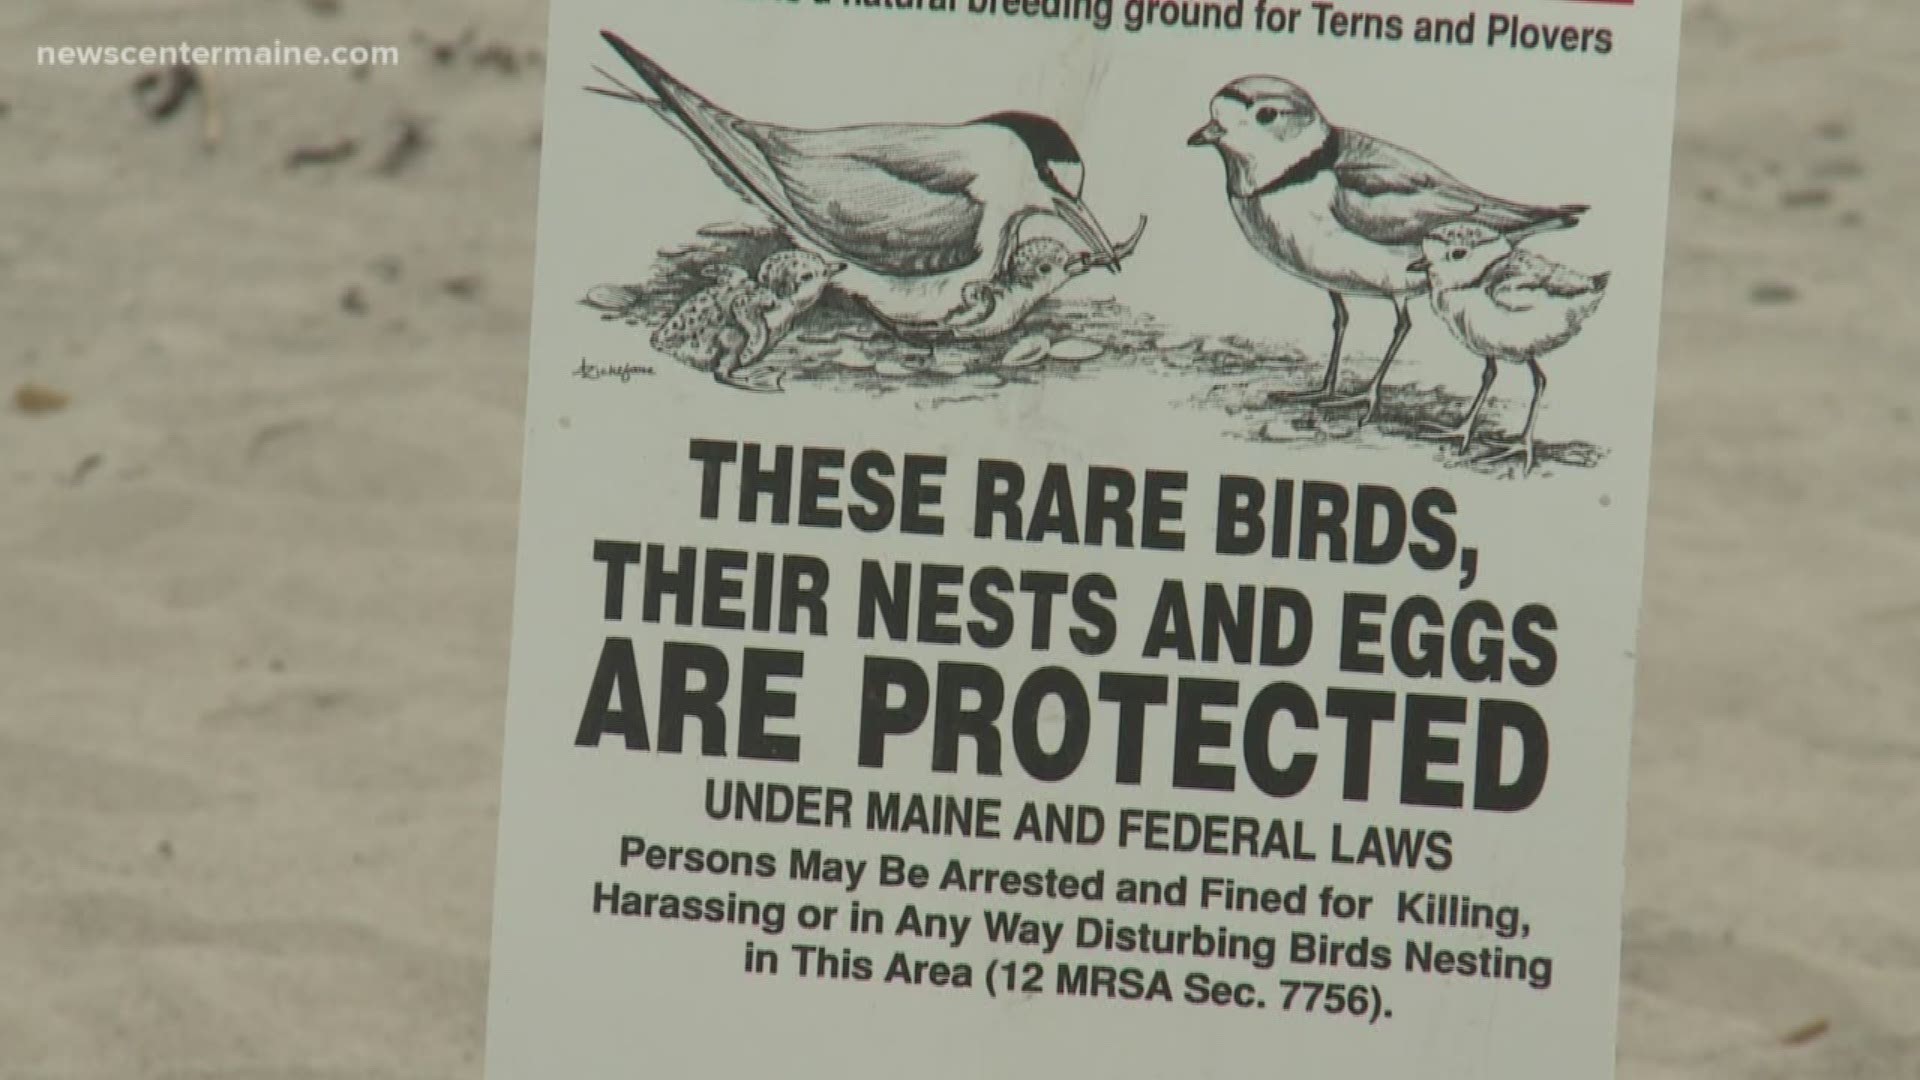 A new survey says it has counted eighty-three nesting pairs of piping plovers. That's 15% more than last year's count which is a new record.